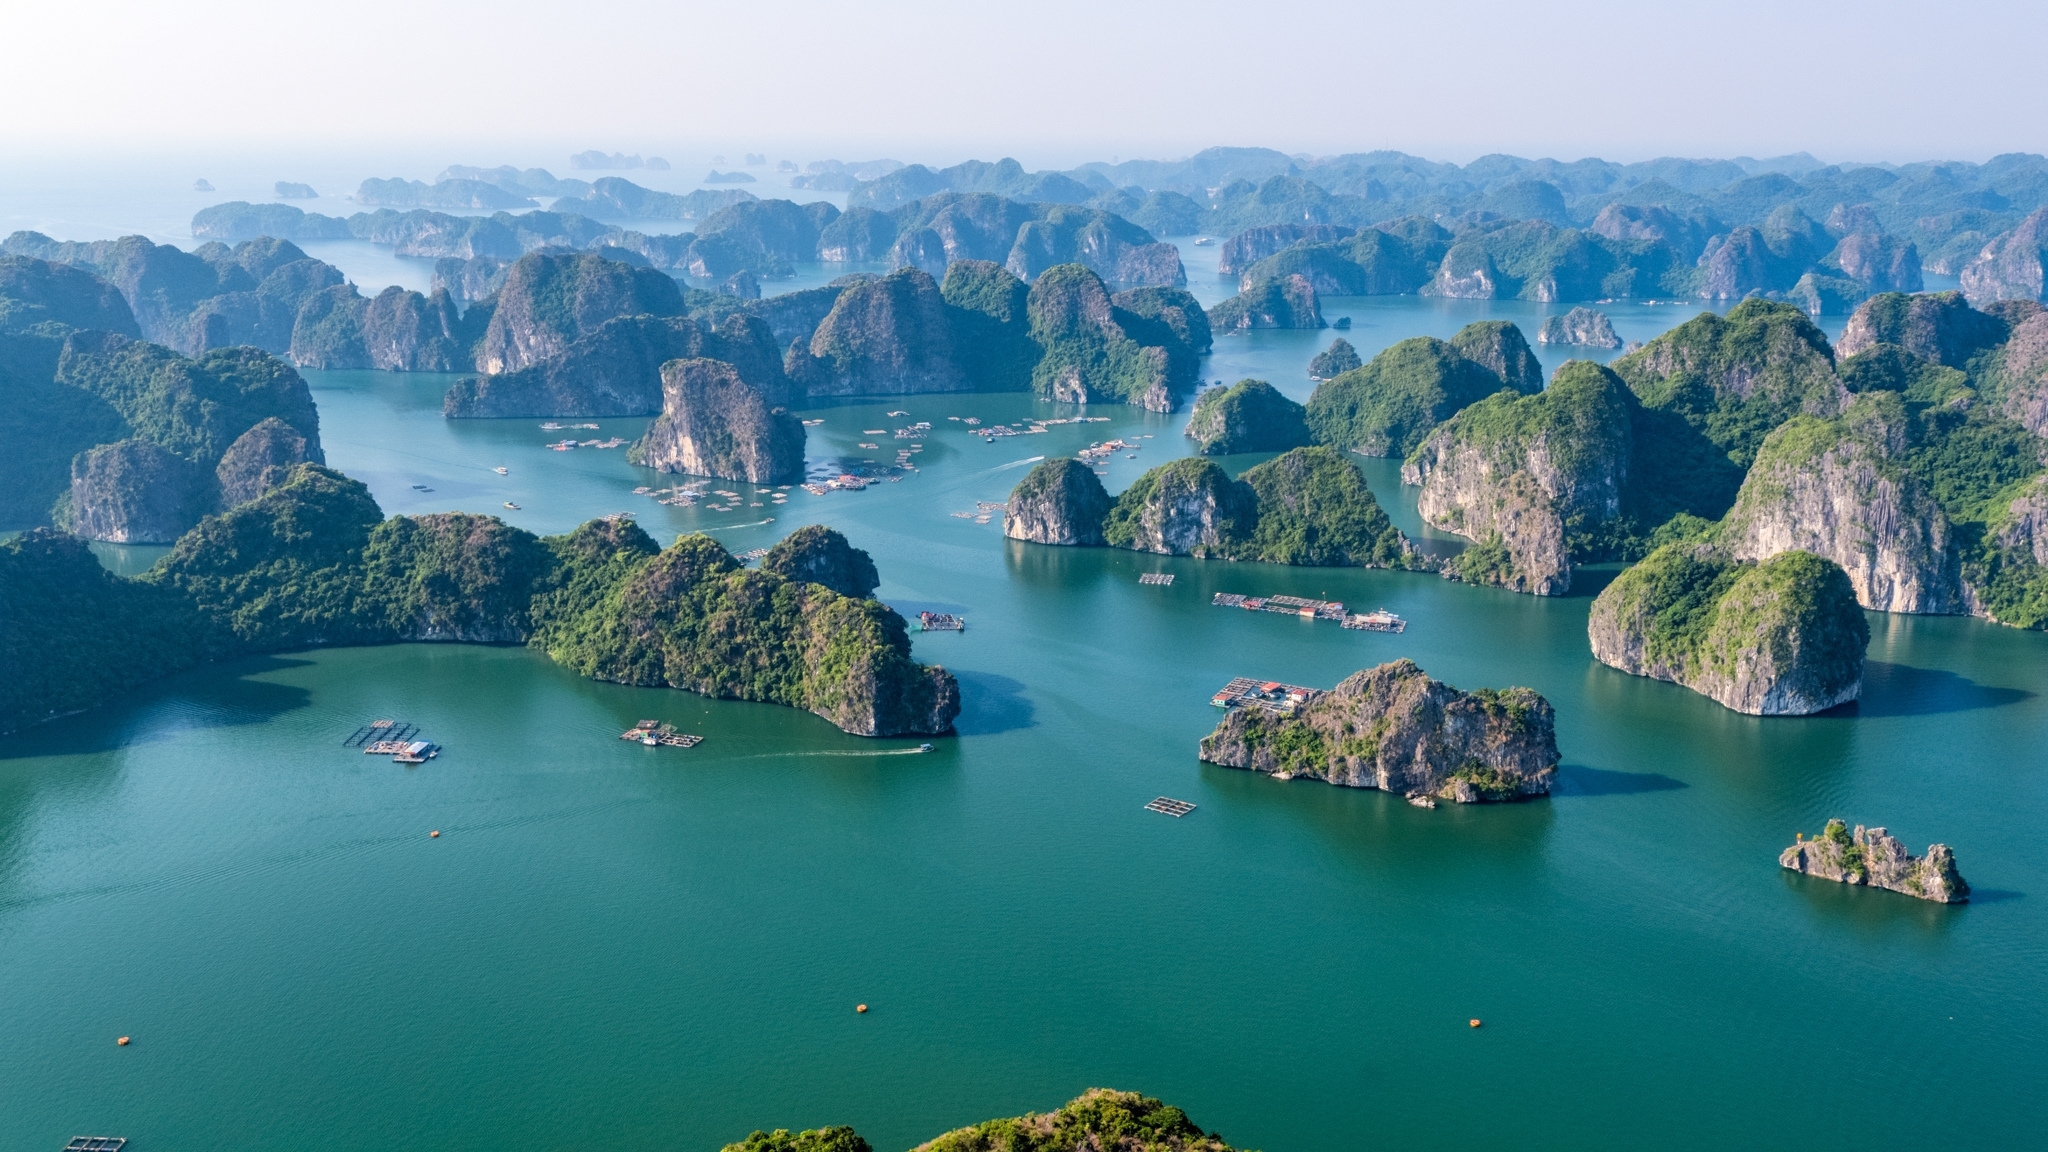 Spring is the perfect time for Halong Bay sightseeing cruise tour